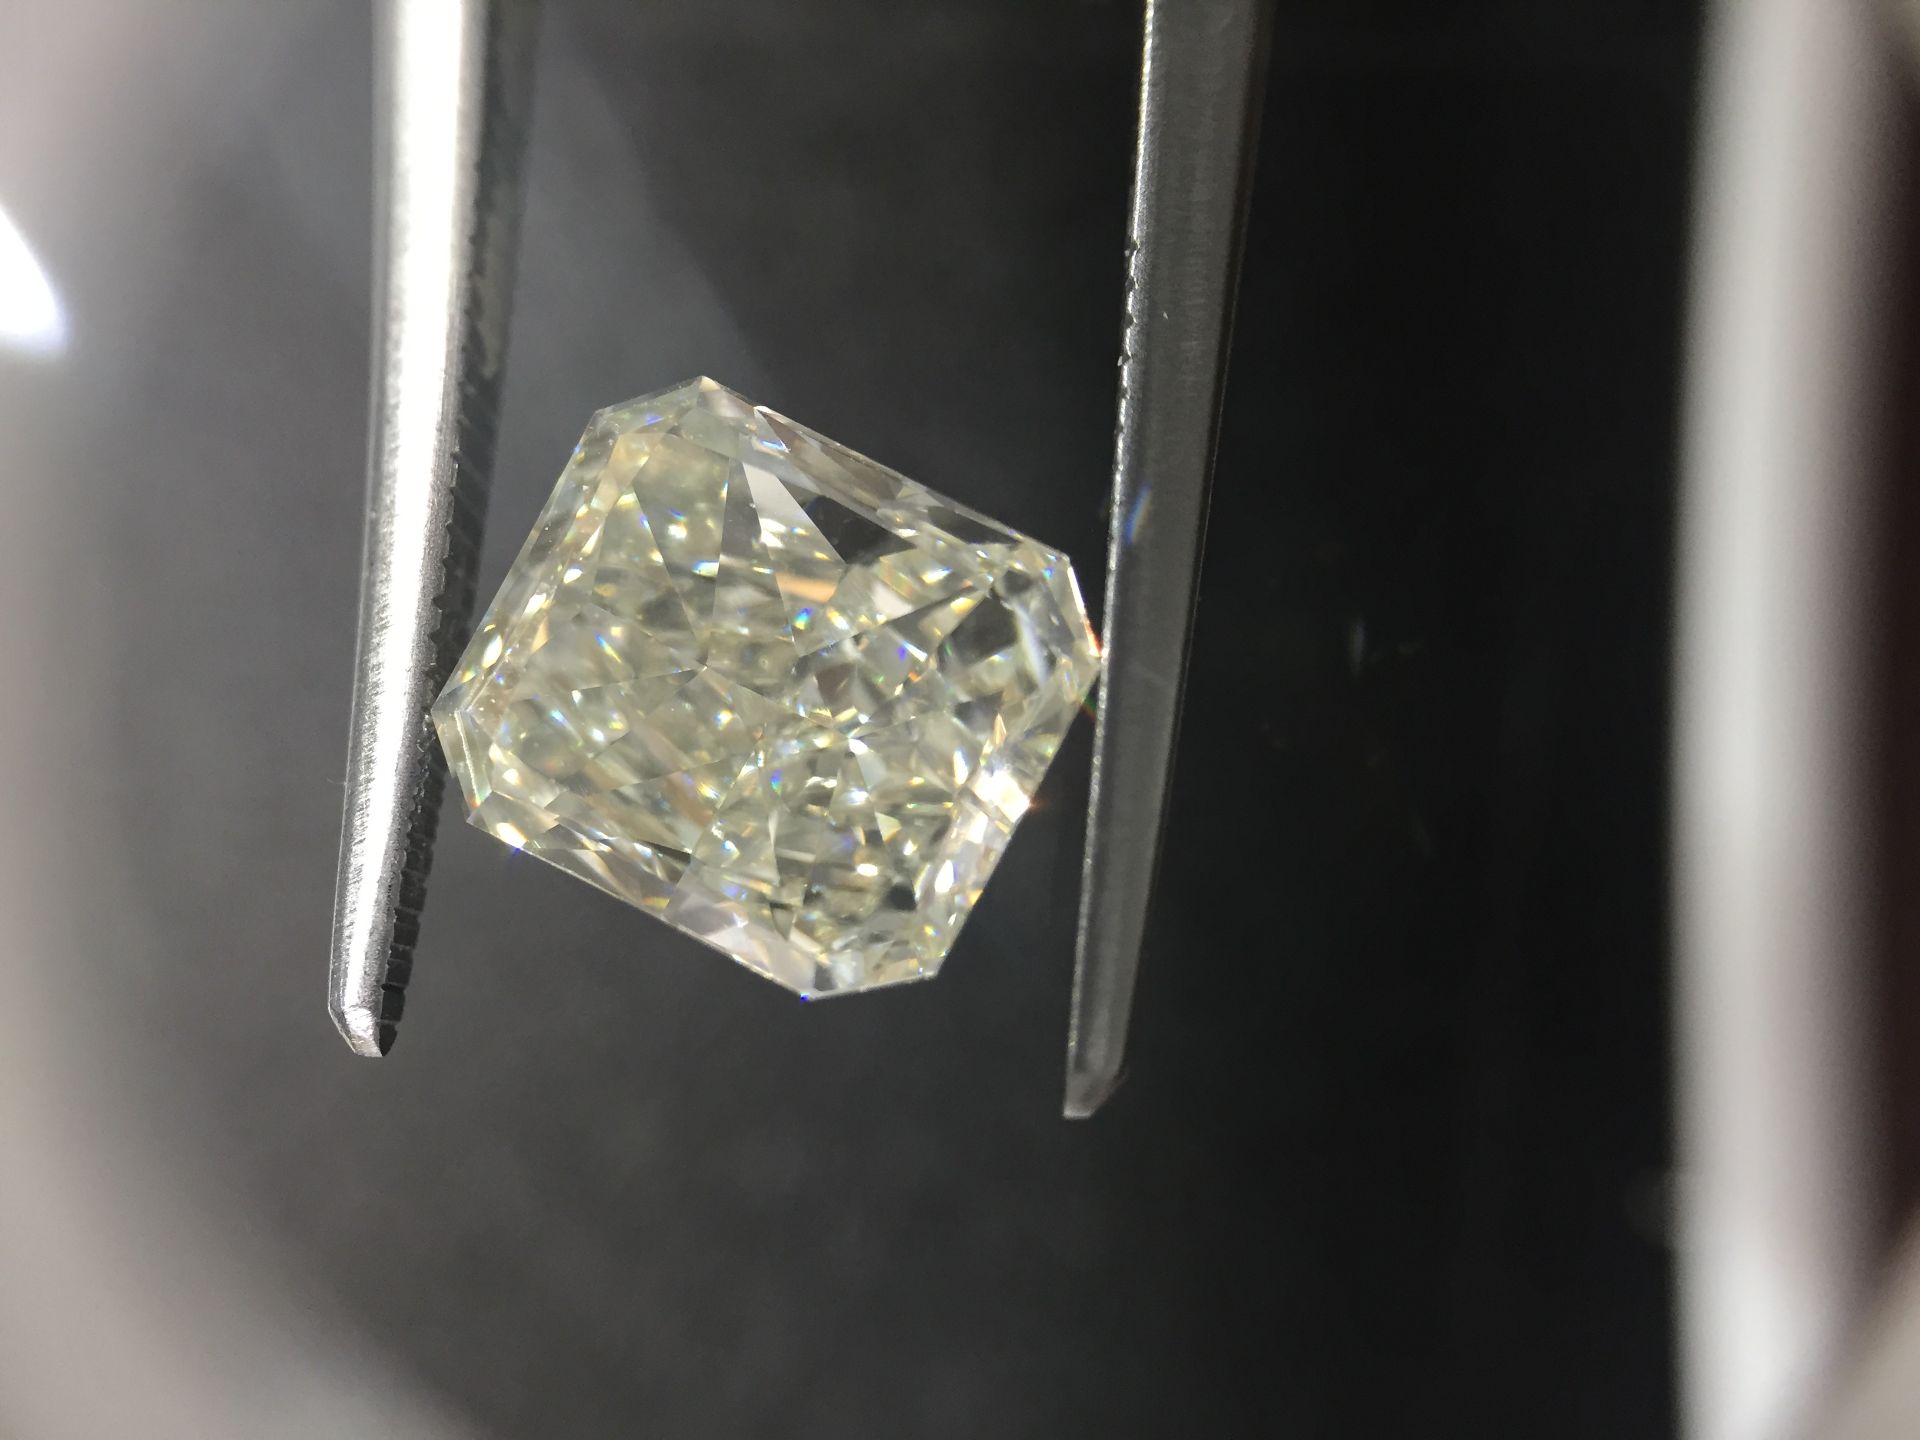 2.03ct radiant cut diamond. K colour, VS1 clarity. No certification. Valued at £17355